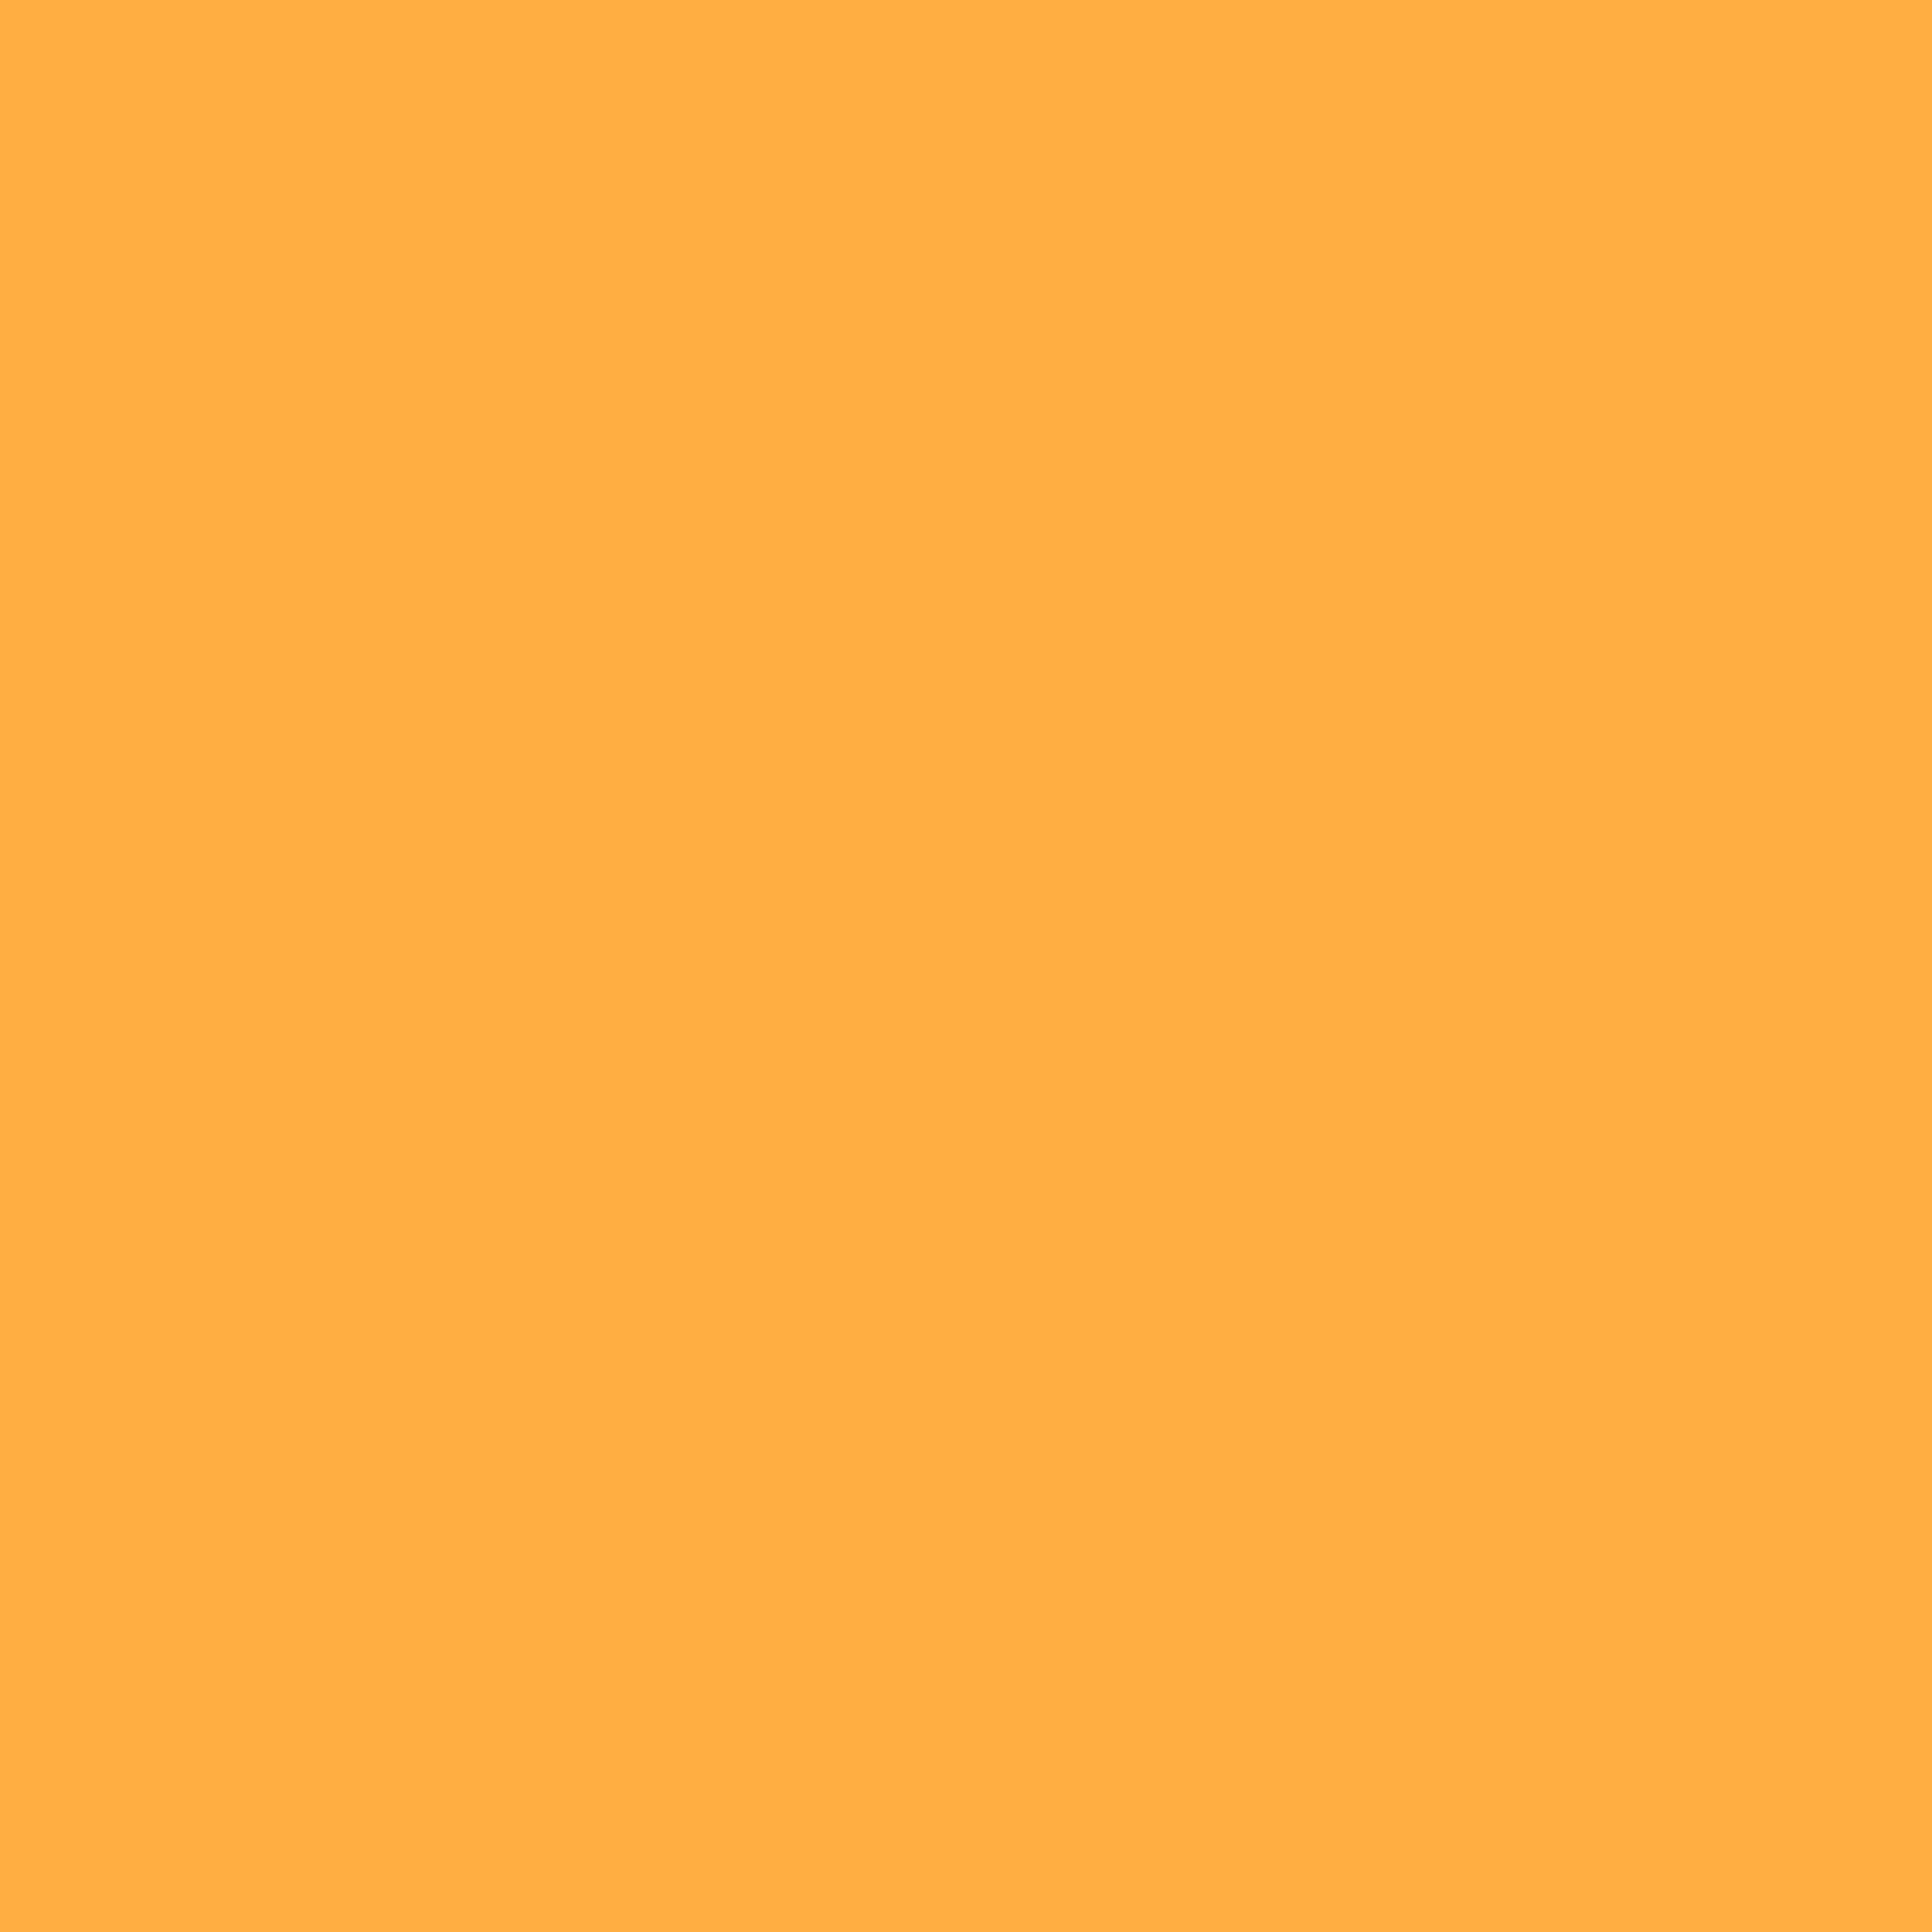 2048x2048 Yellow Orange Solid Color Background